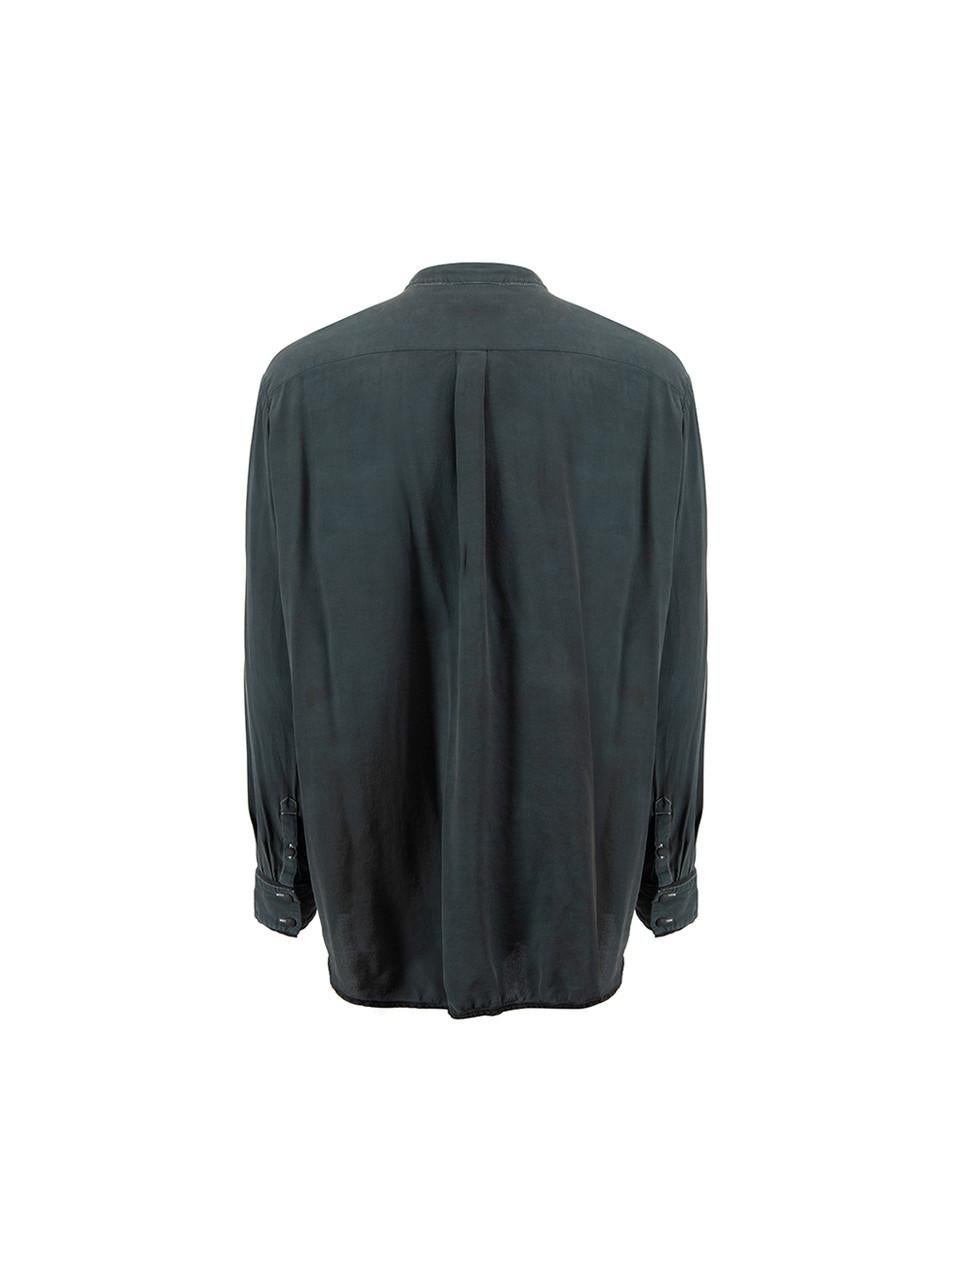 Acne Studios Deep Green Silk Blouse Size M In Excellent Condition For Sale In London, GB